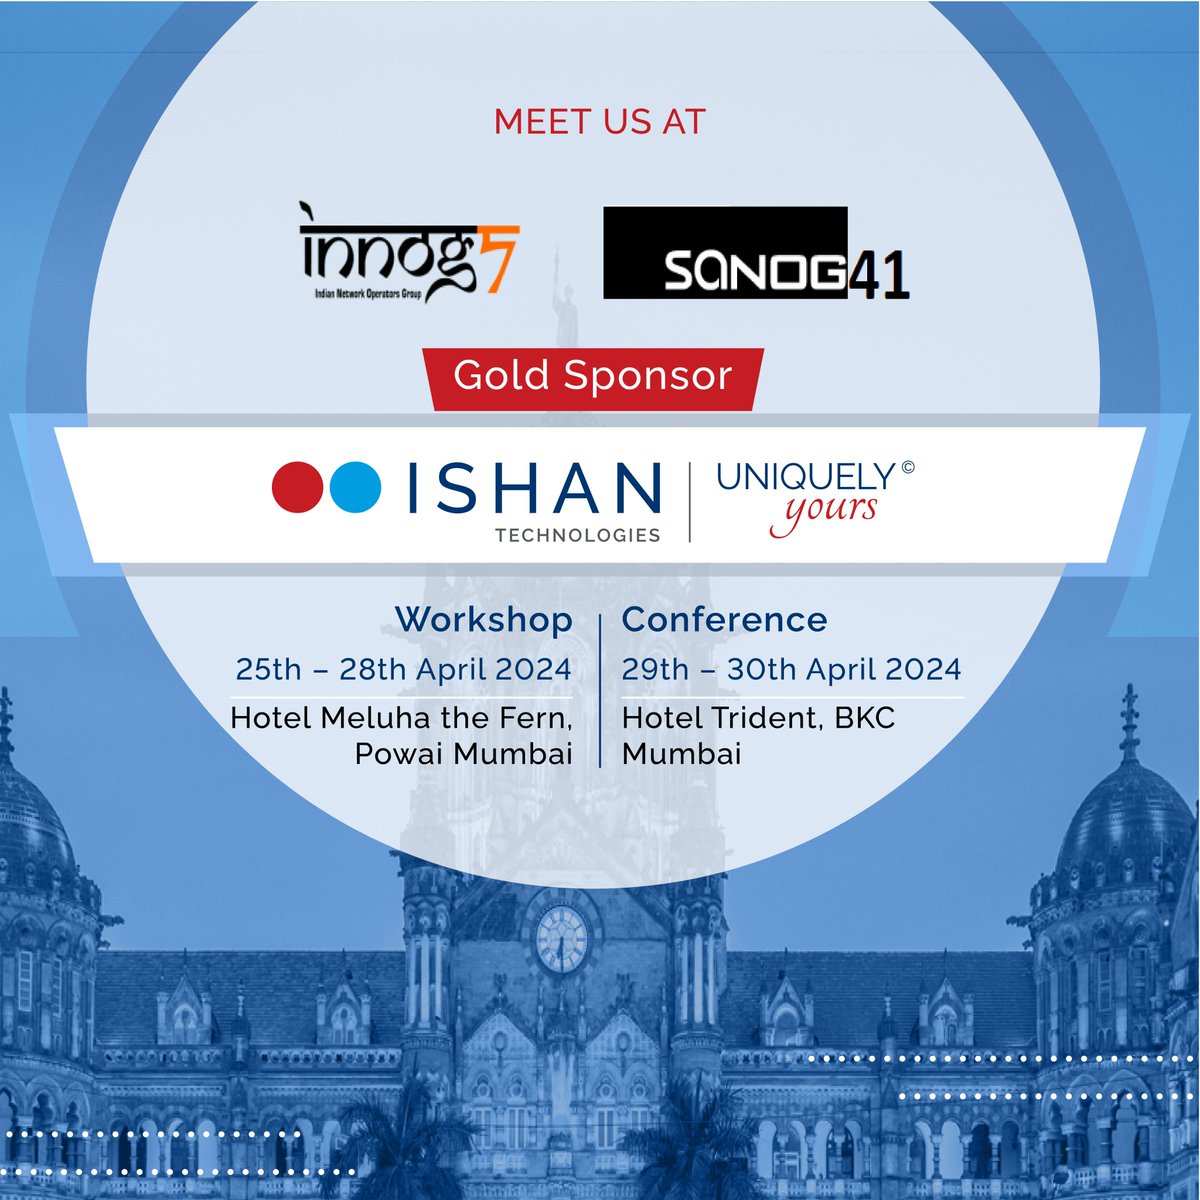 #IshanTechnologies is proud to announce our participation as a GOLD sponsor at #SANOG41 happening from April 25th to April 30th, 2024! Don't miss out on this incredible opportunity to connect and gain valuable insights. See you there!

#ishanism #innog7 #Internet #technologies